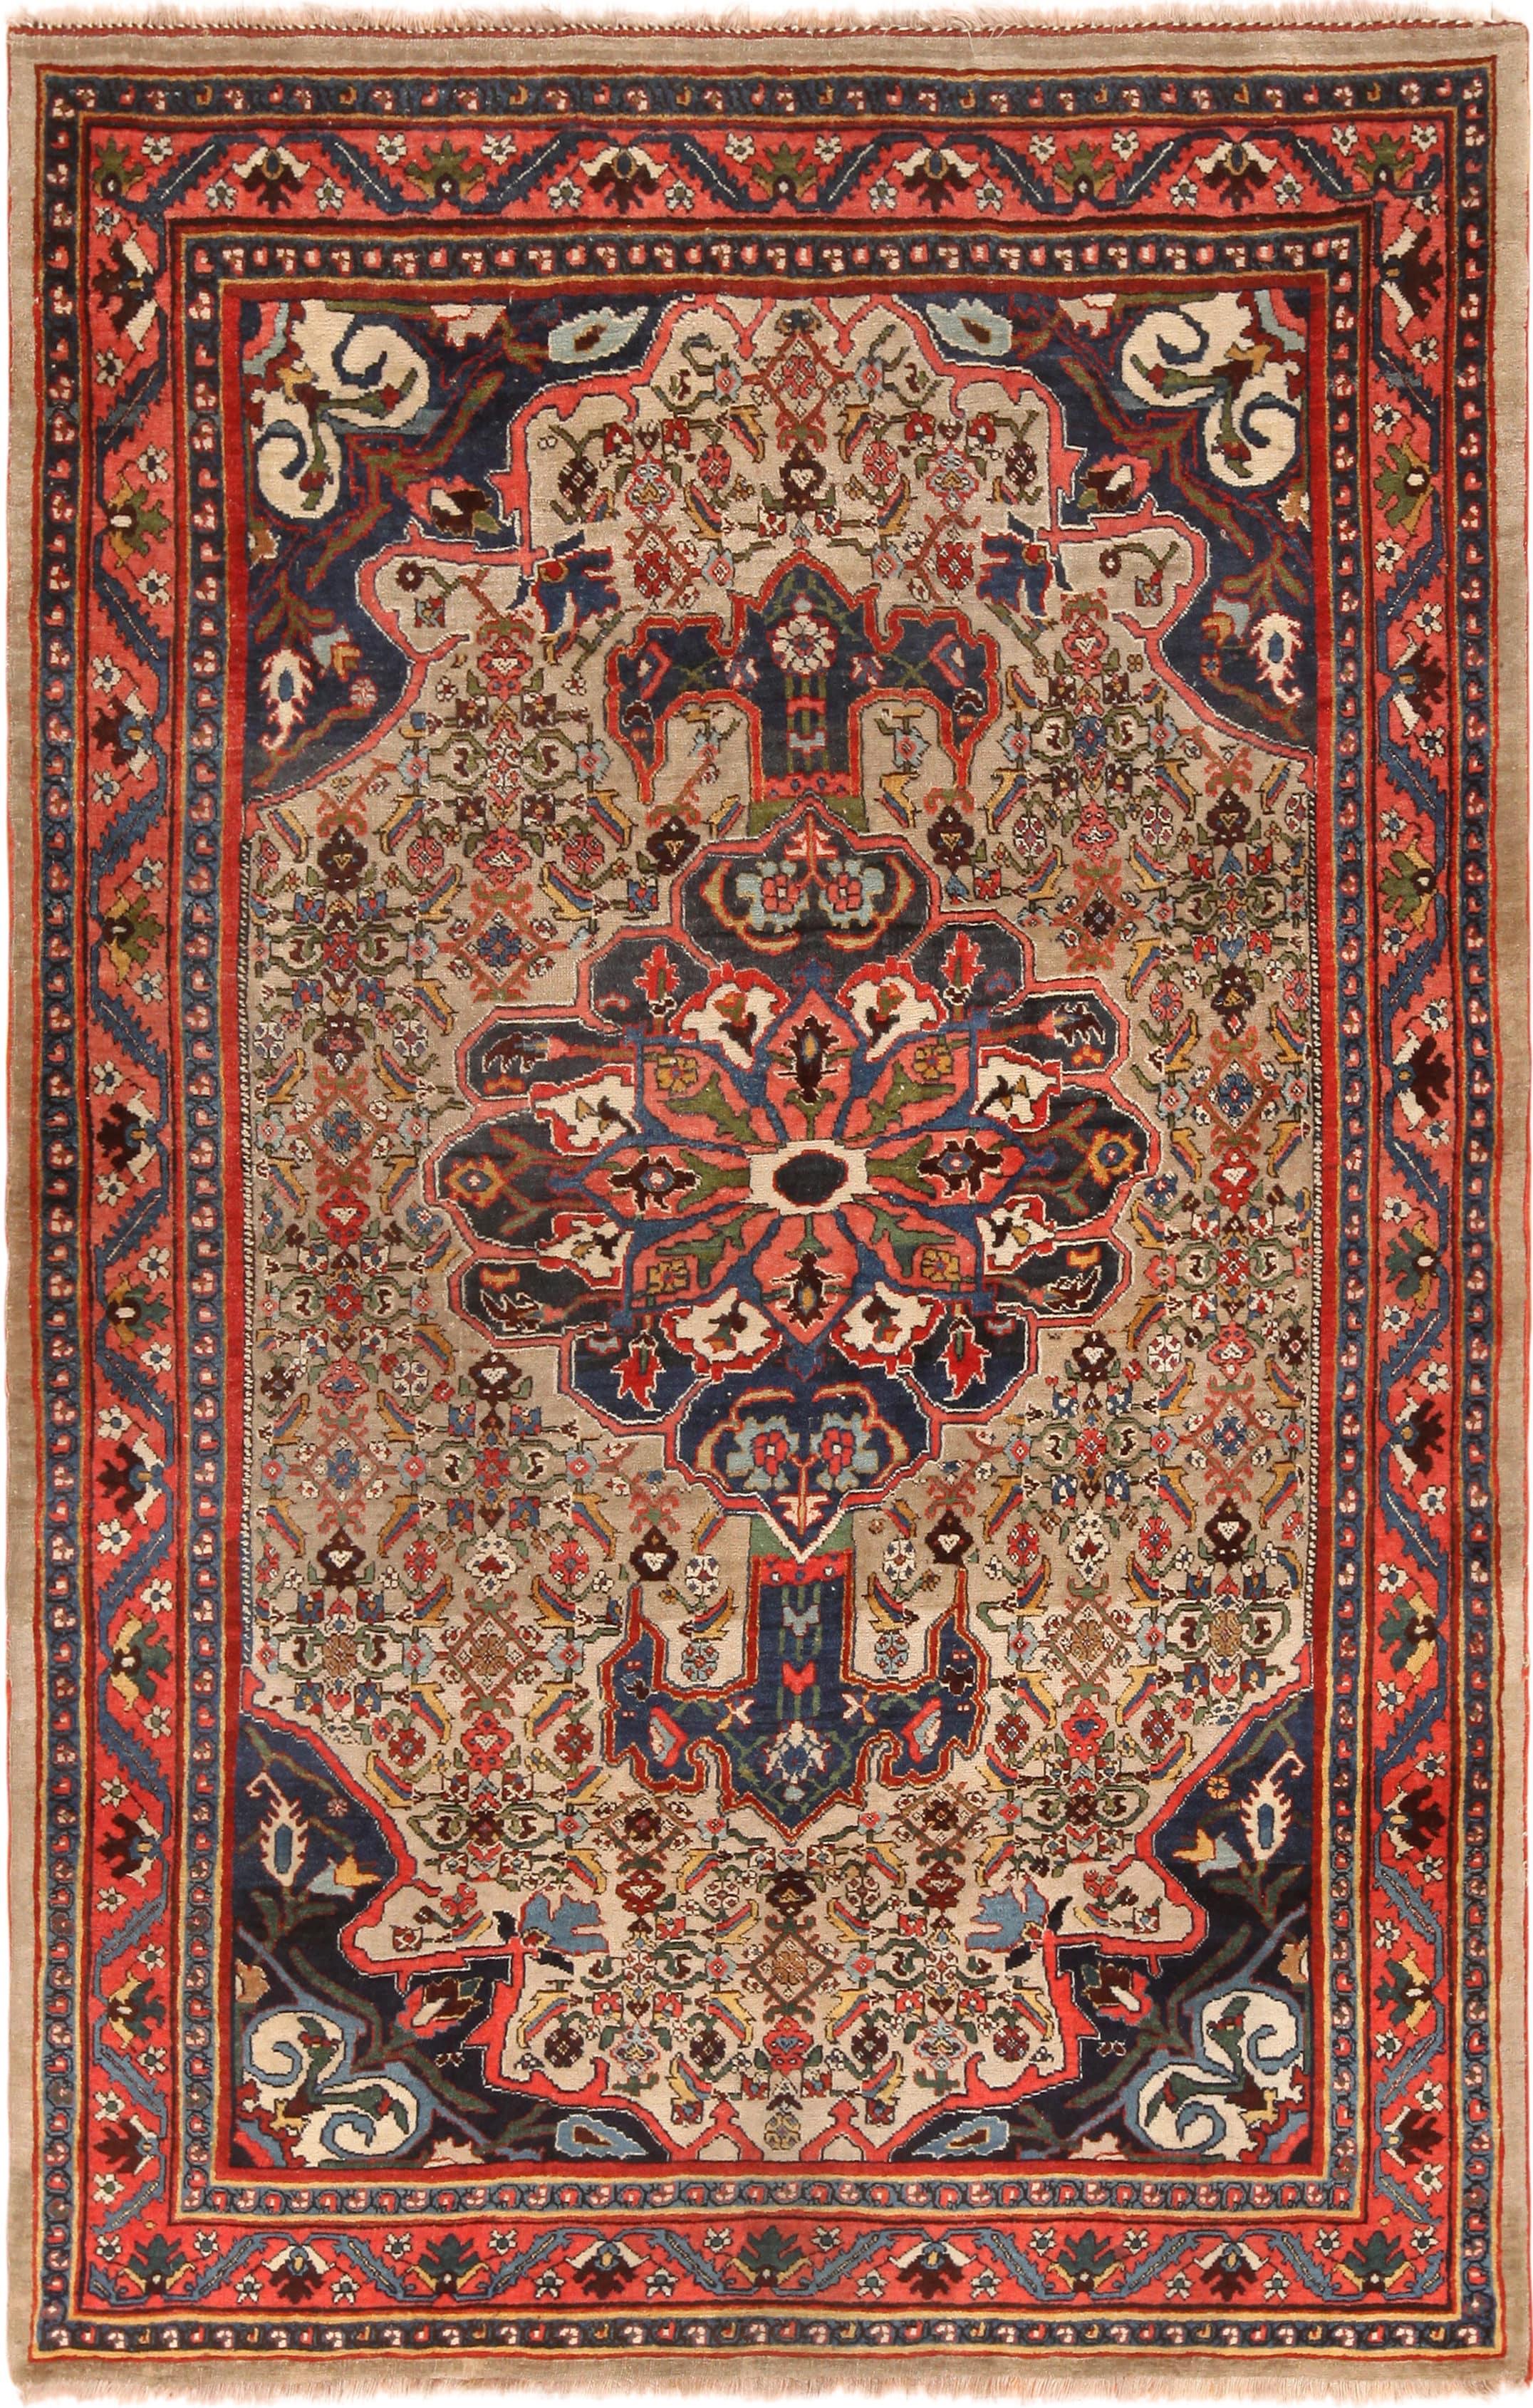 Hand-Knotted Tribal Antique Persian Bidjar Rug. 4 ft 7 in x 7 ft